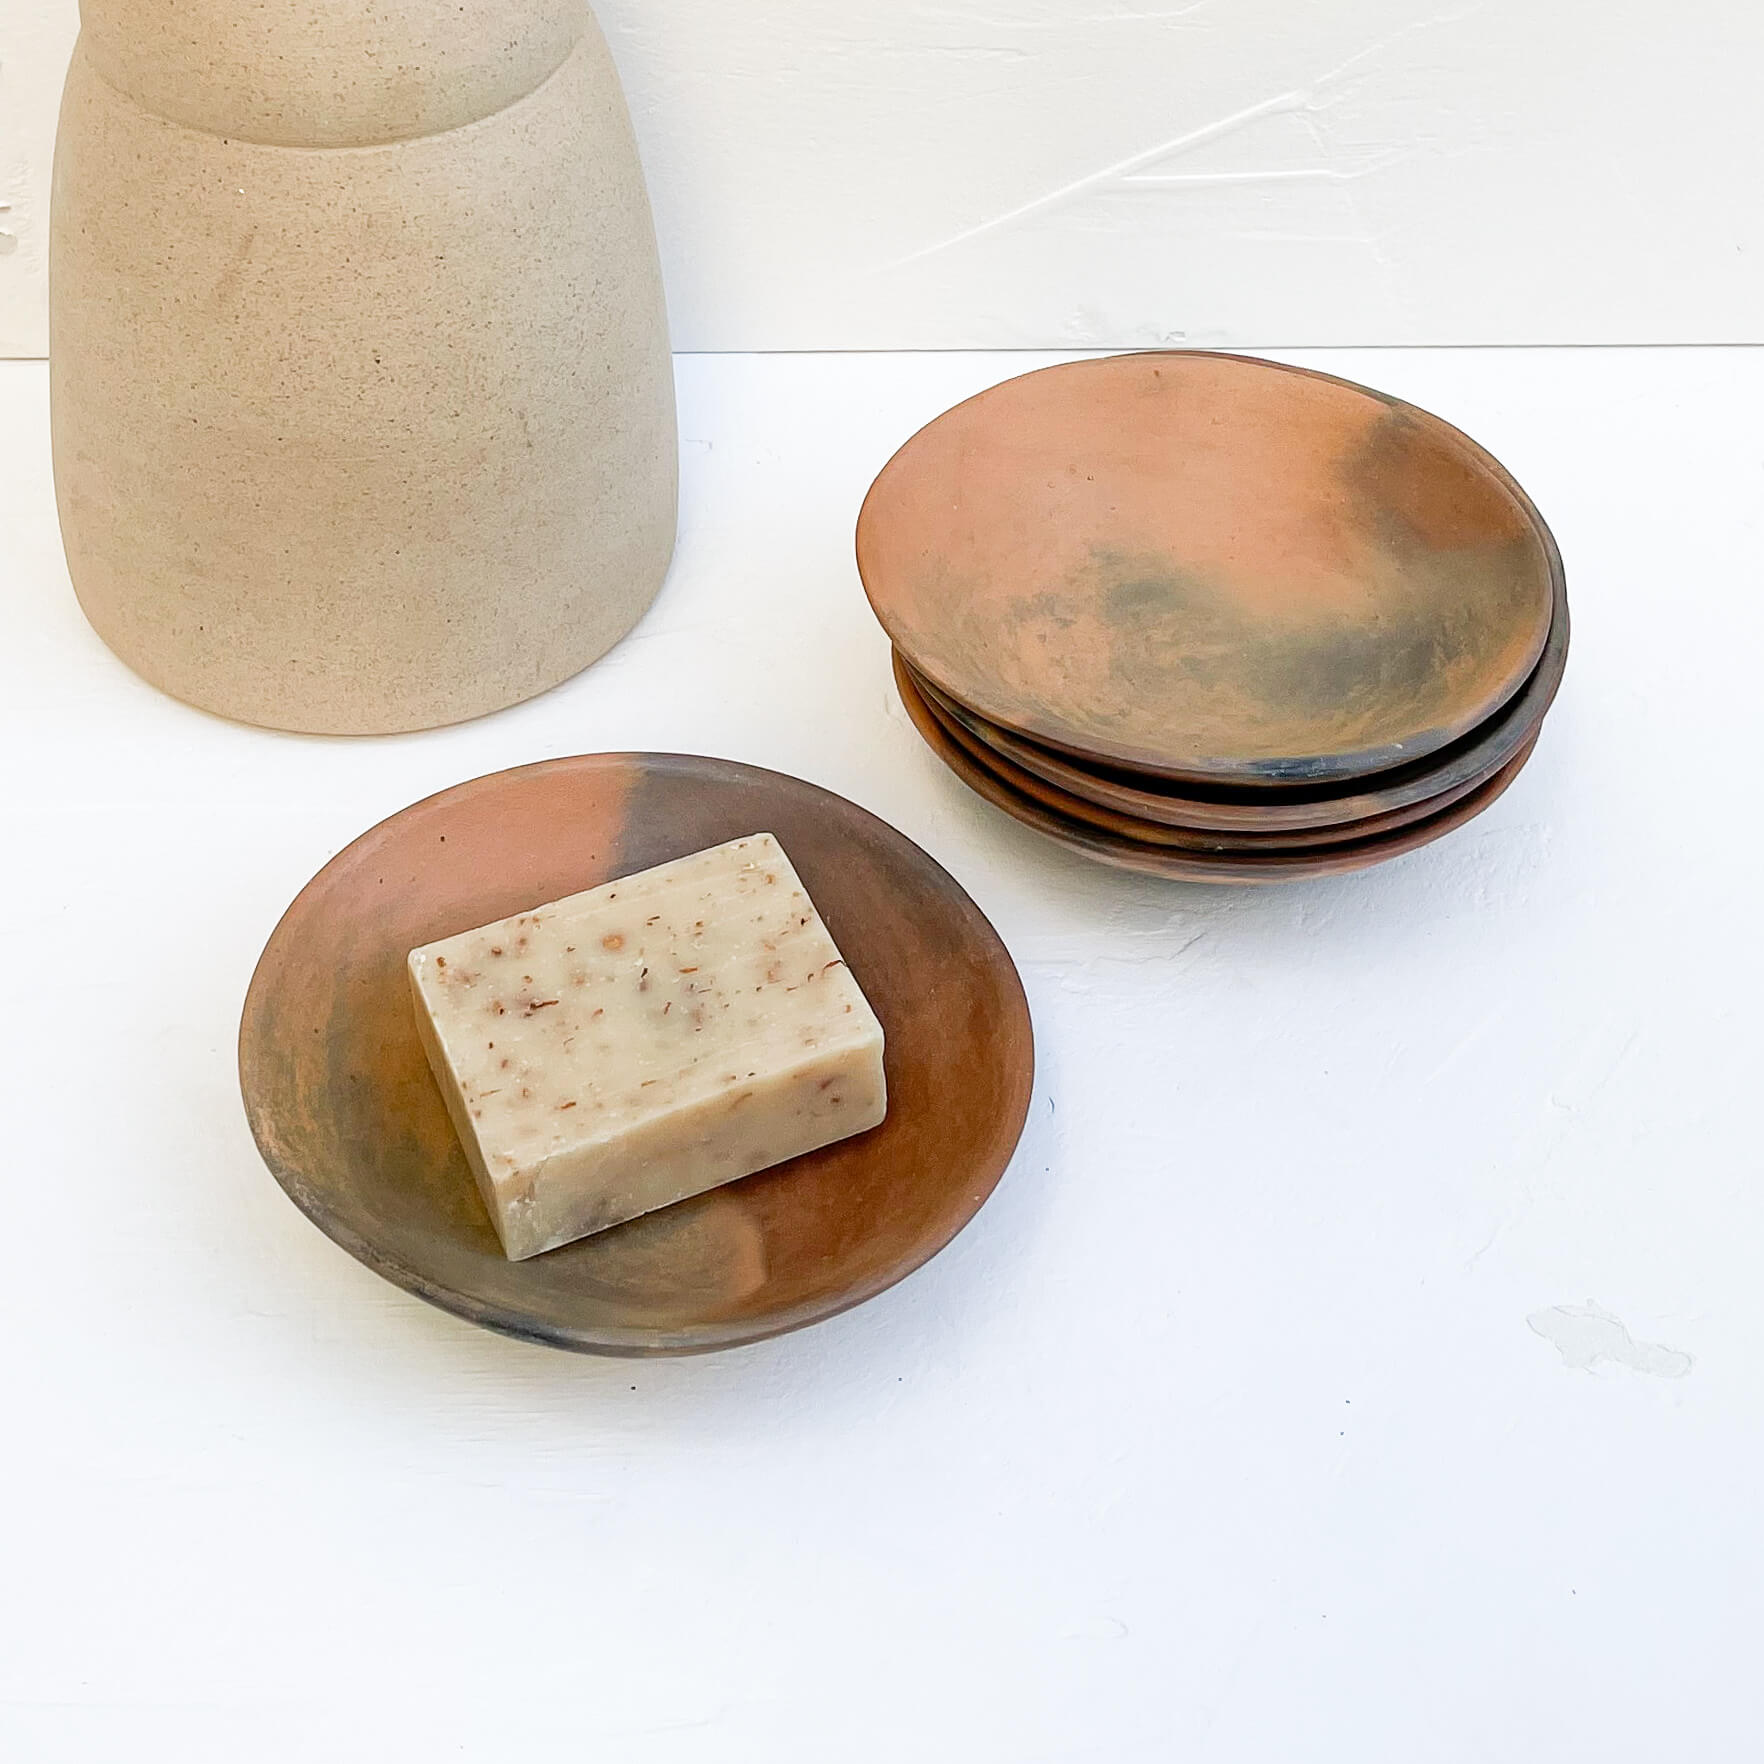 A collection of small clay plates made by the Pai Pai community with a bar of soap and ceramic vase.